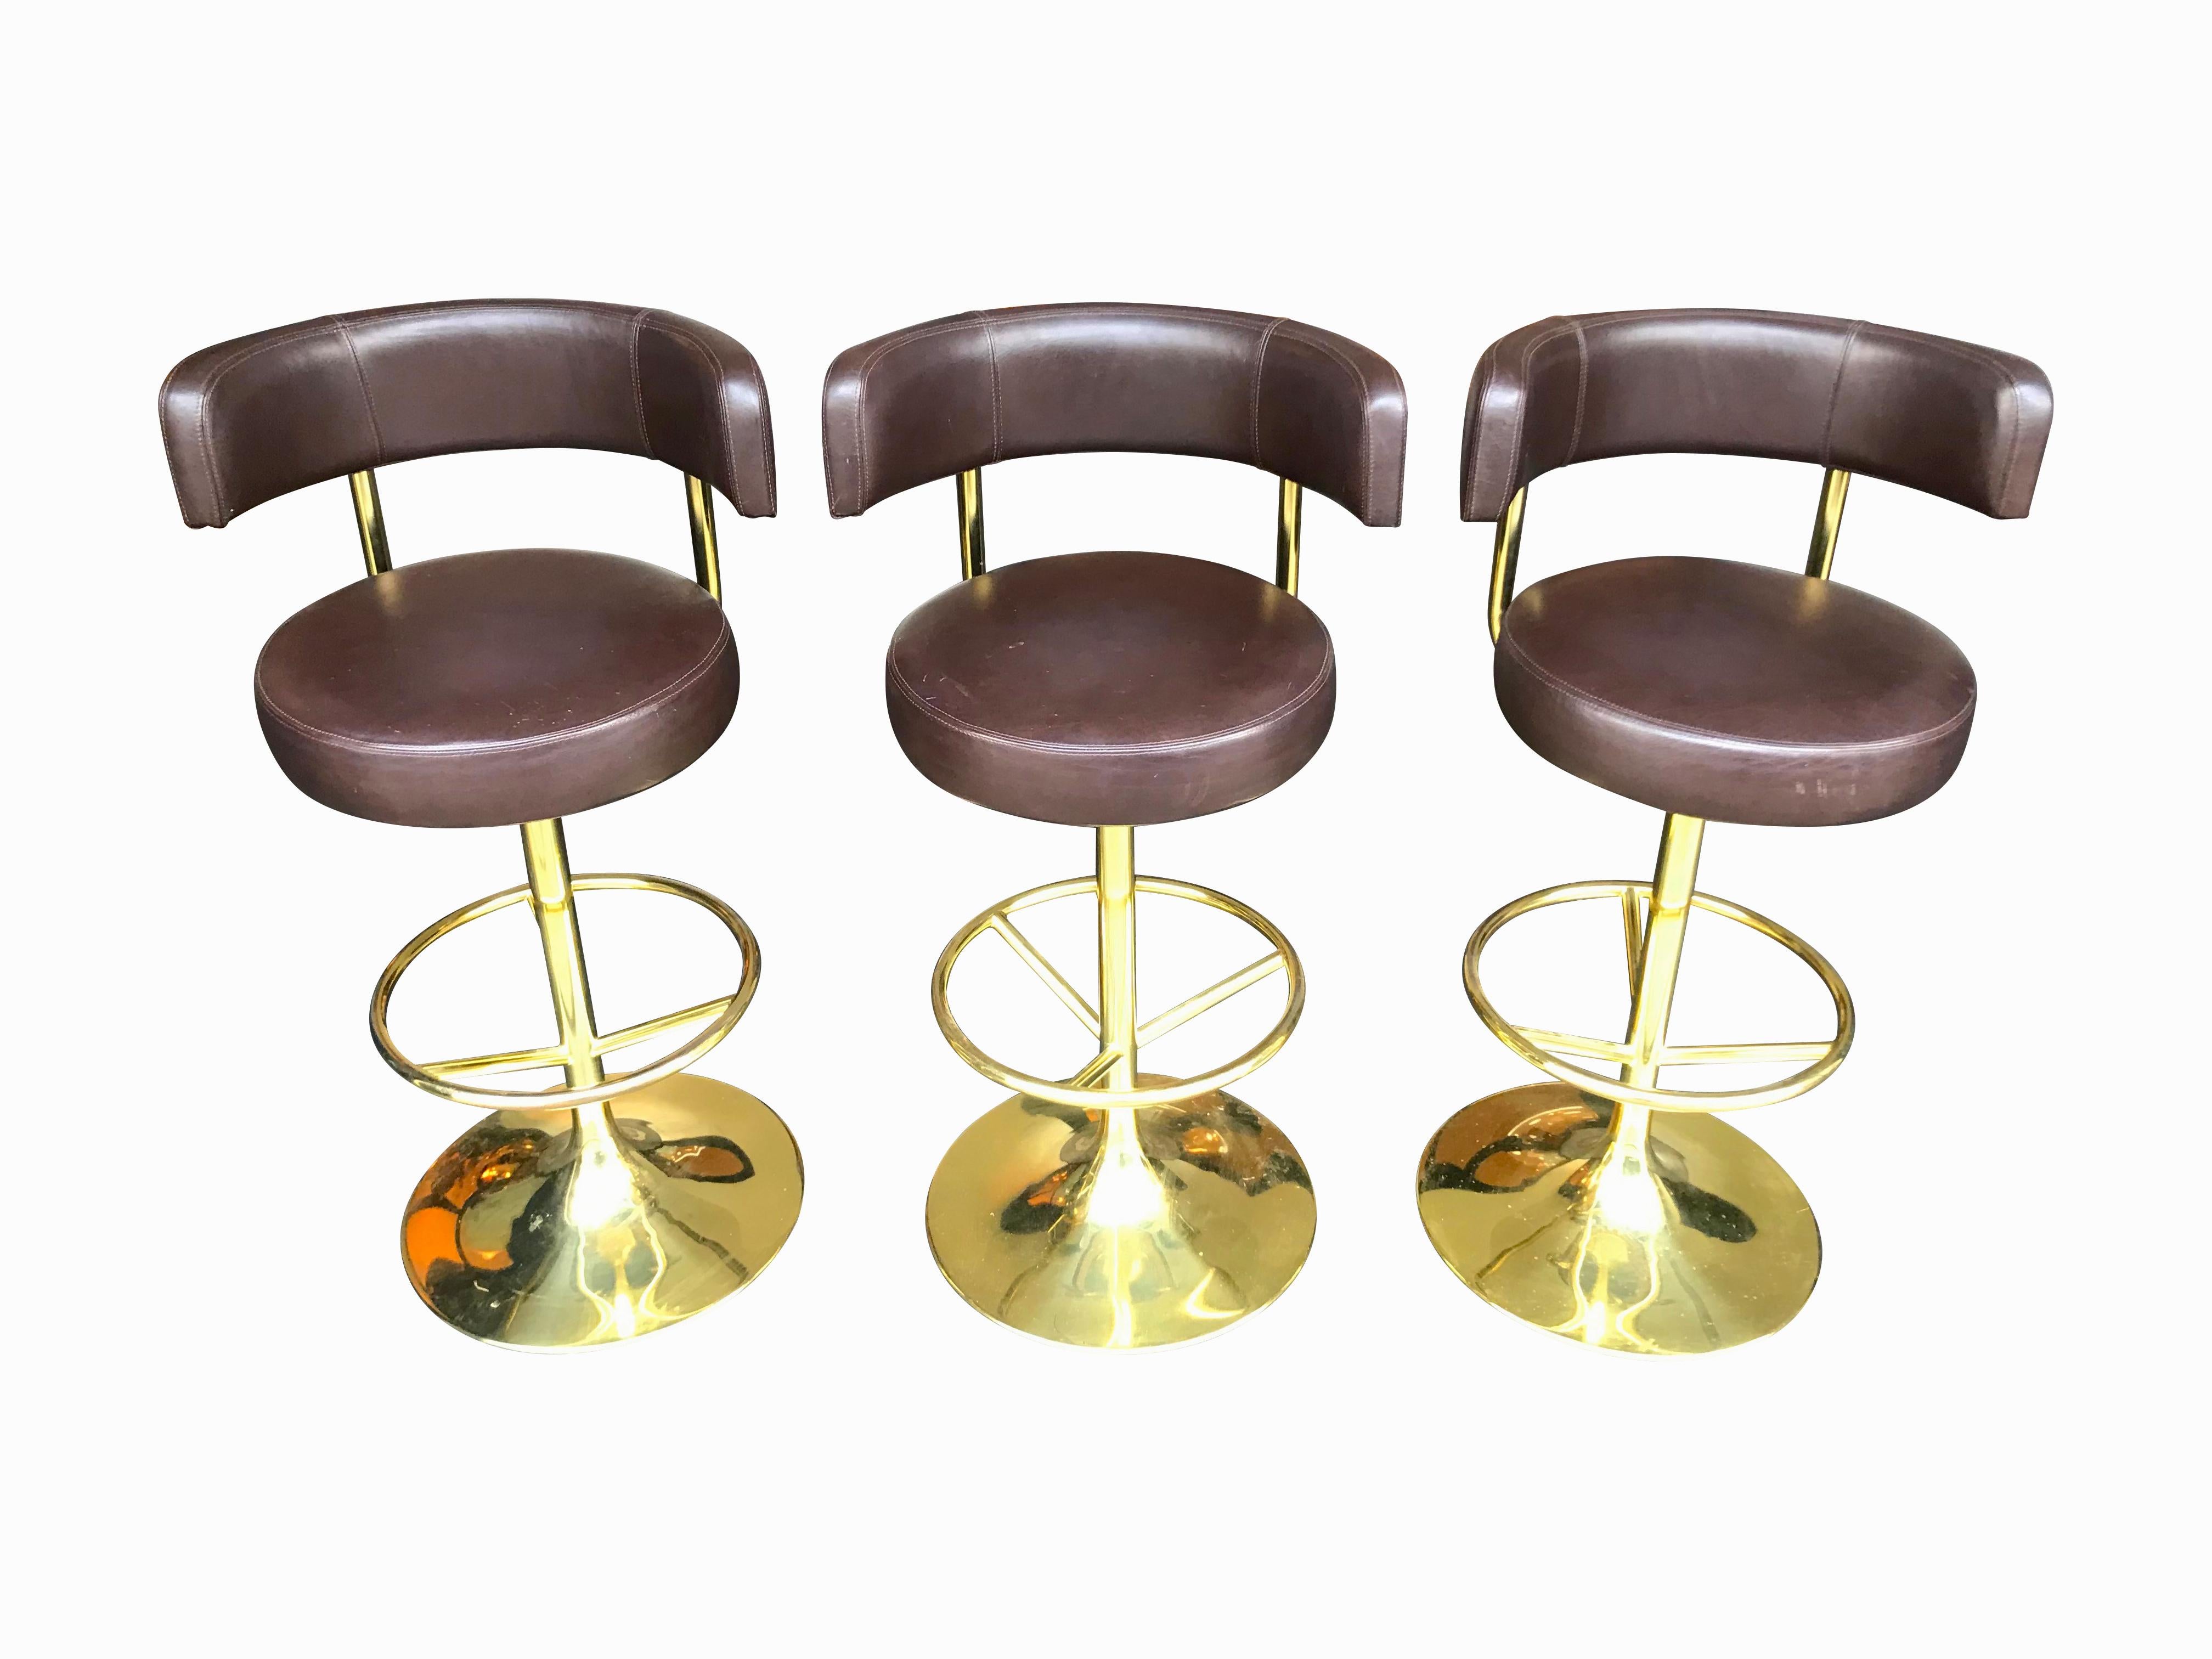 A set of three original Börge Johansson “Jupiter” bar stools with tan brown leather seats and backrests on a revolving gilt metal base and frame. Each has a footrest and original 